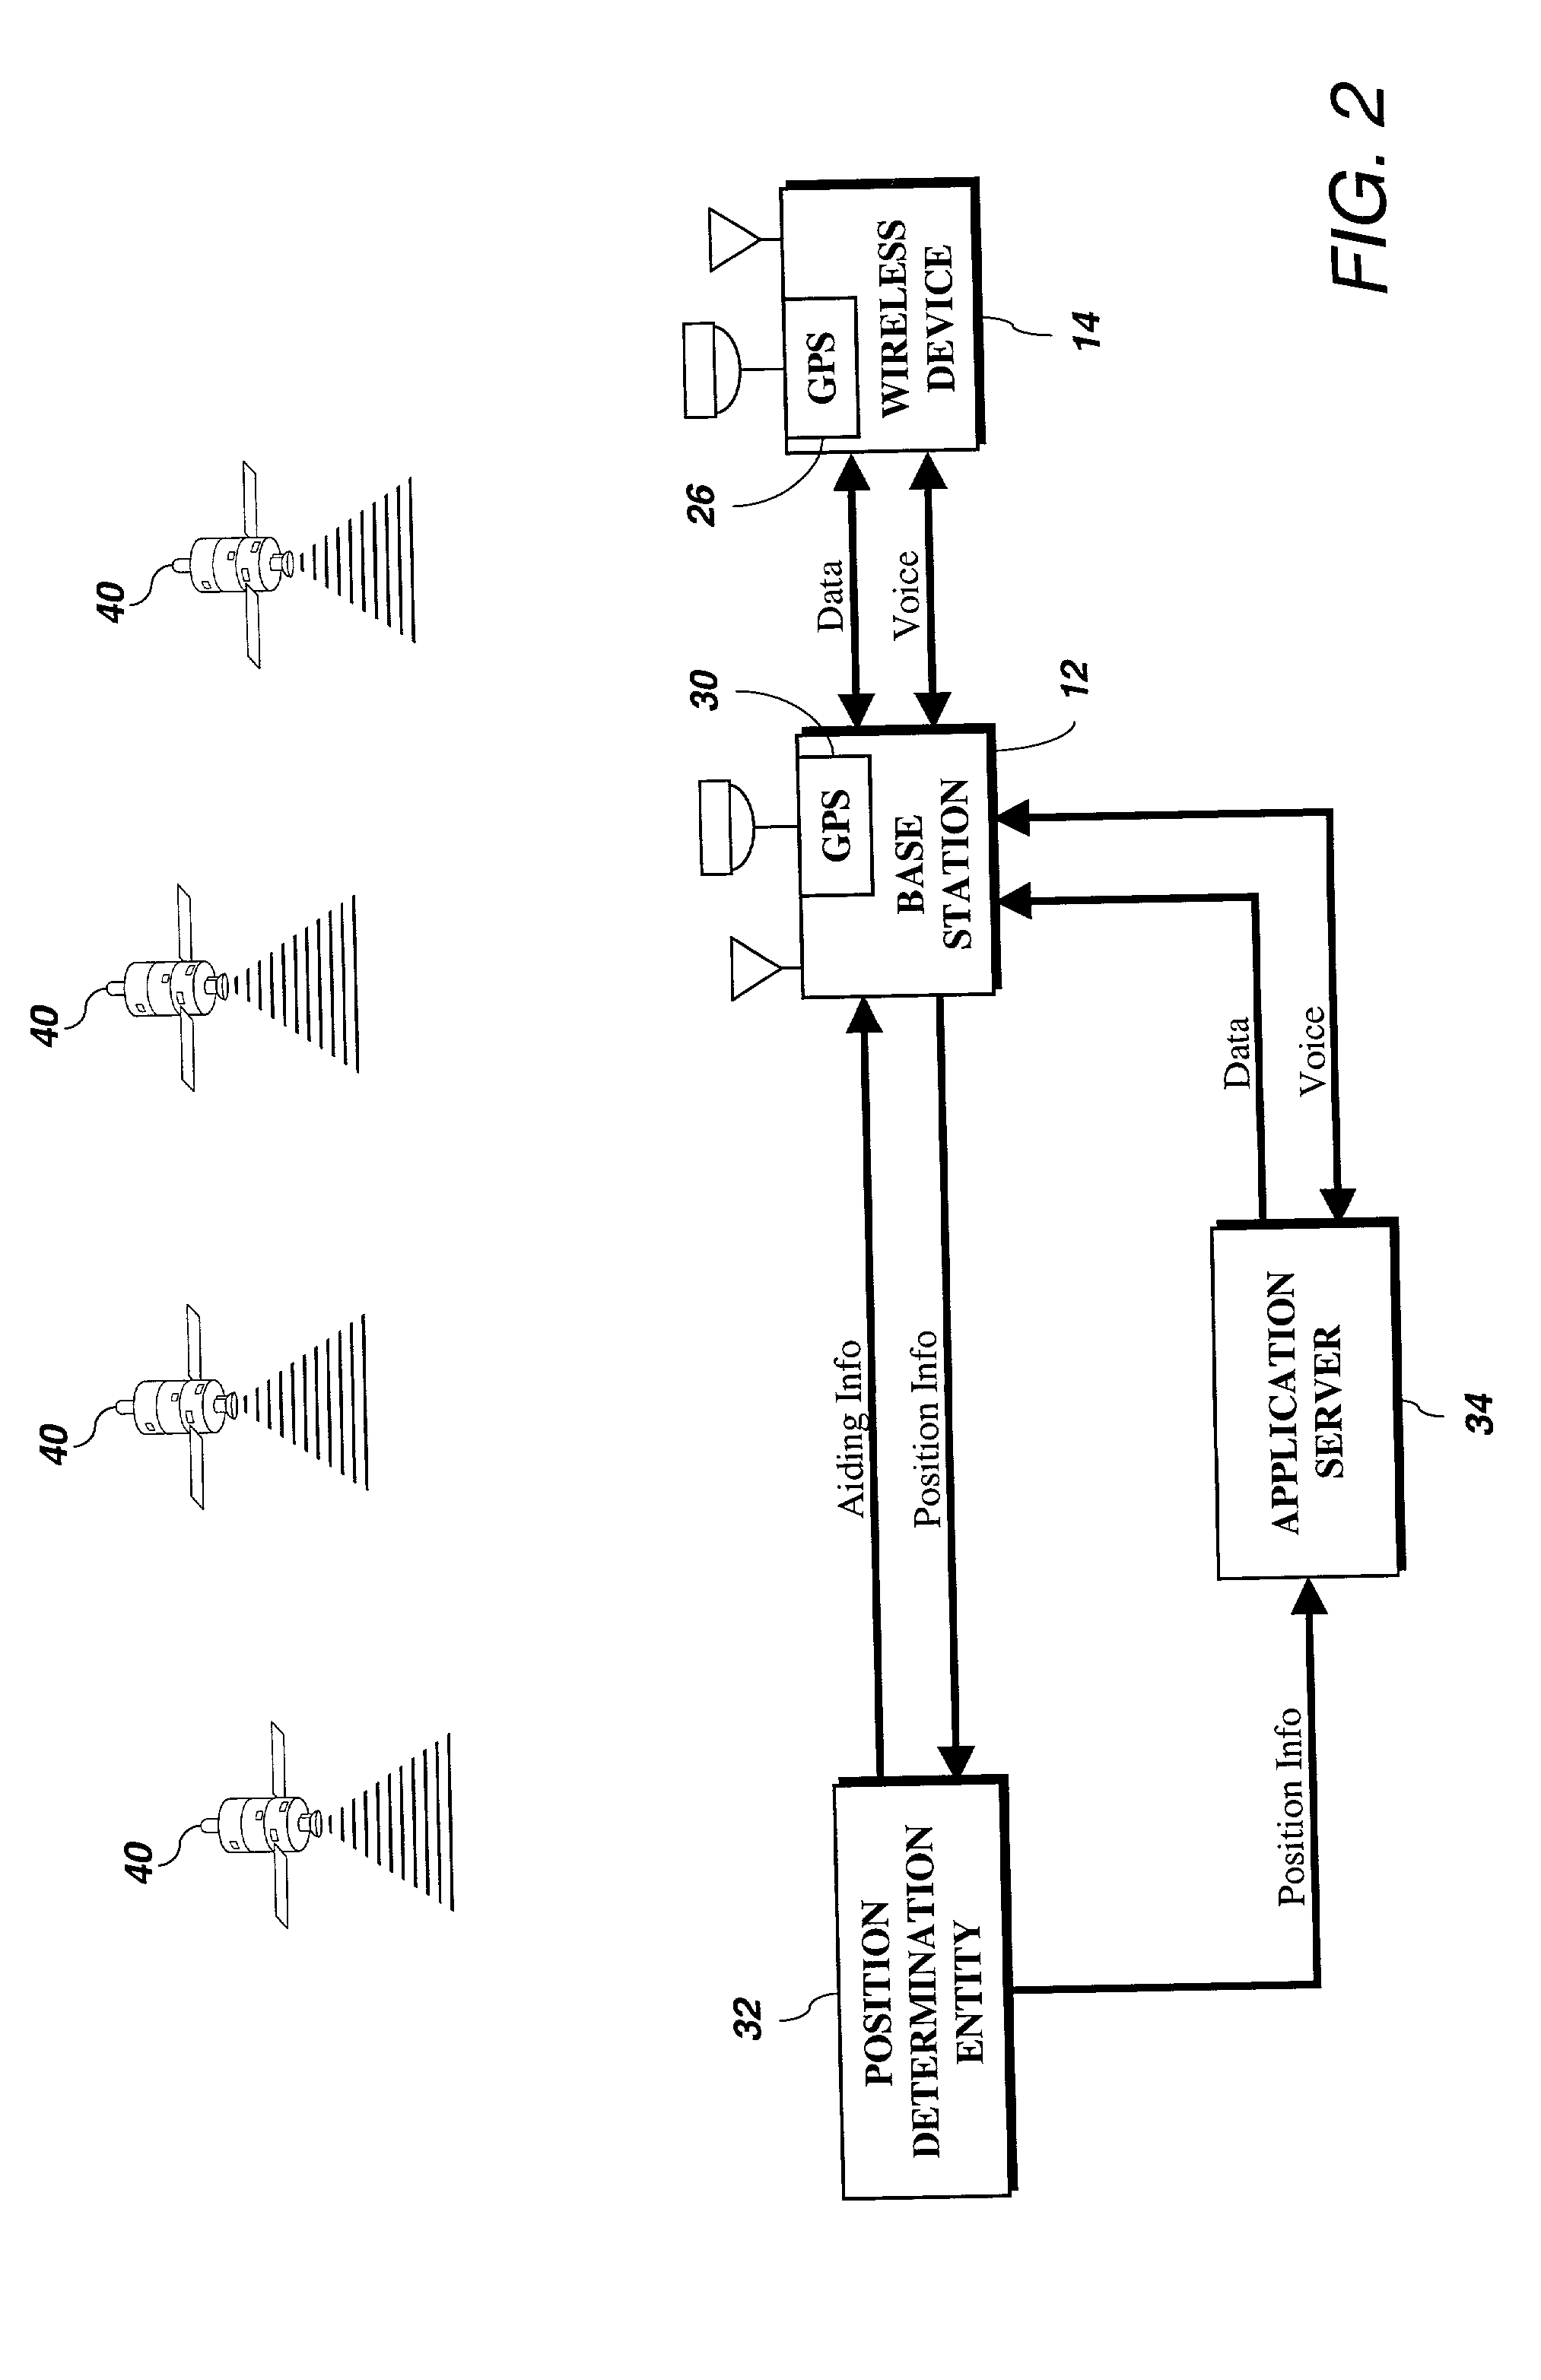 System and method for providing position-based information to a user of a wireless device